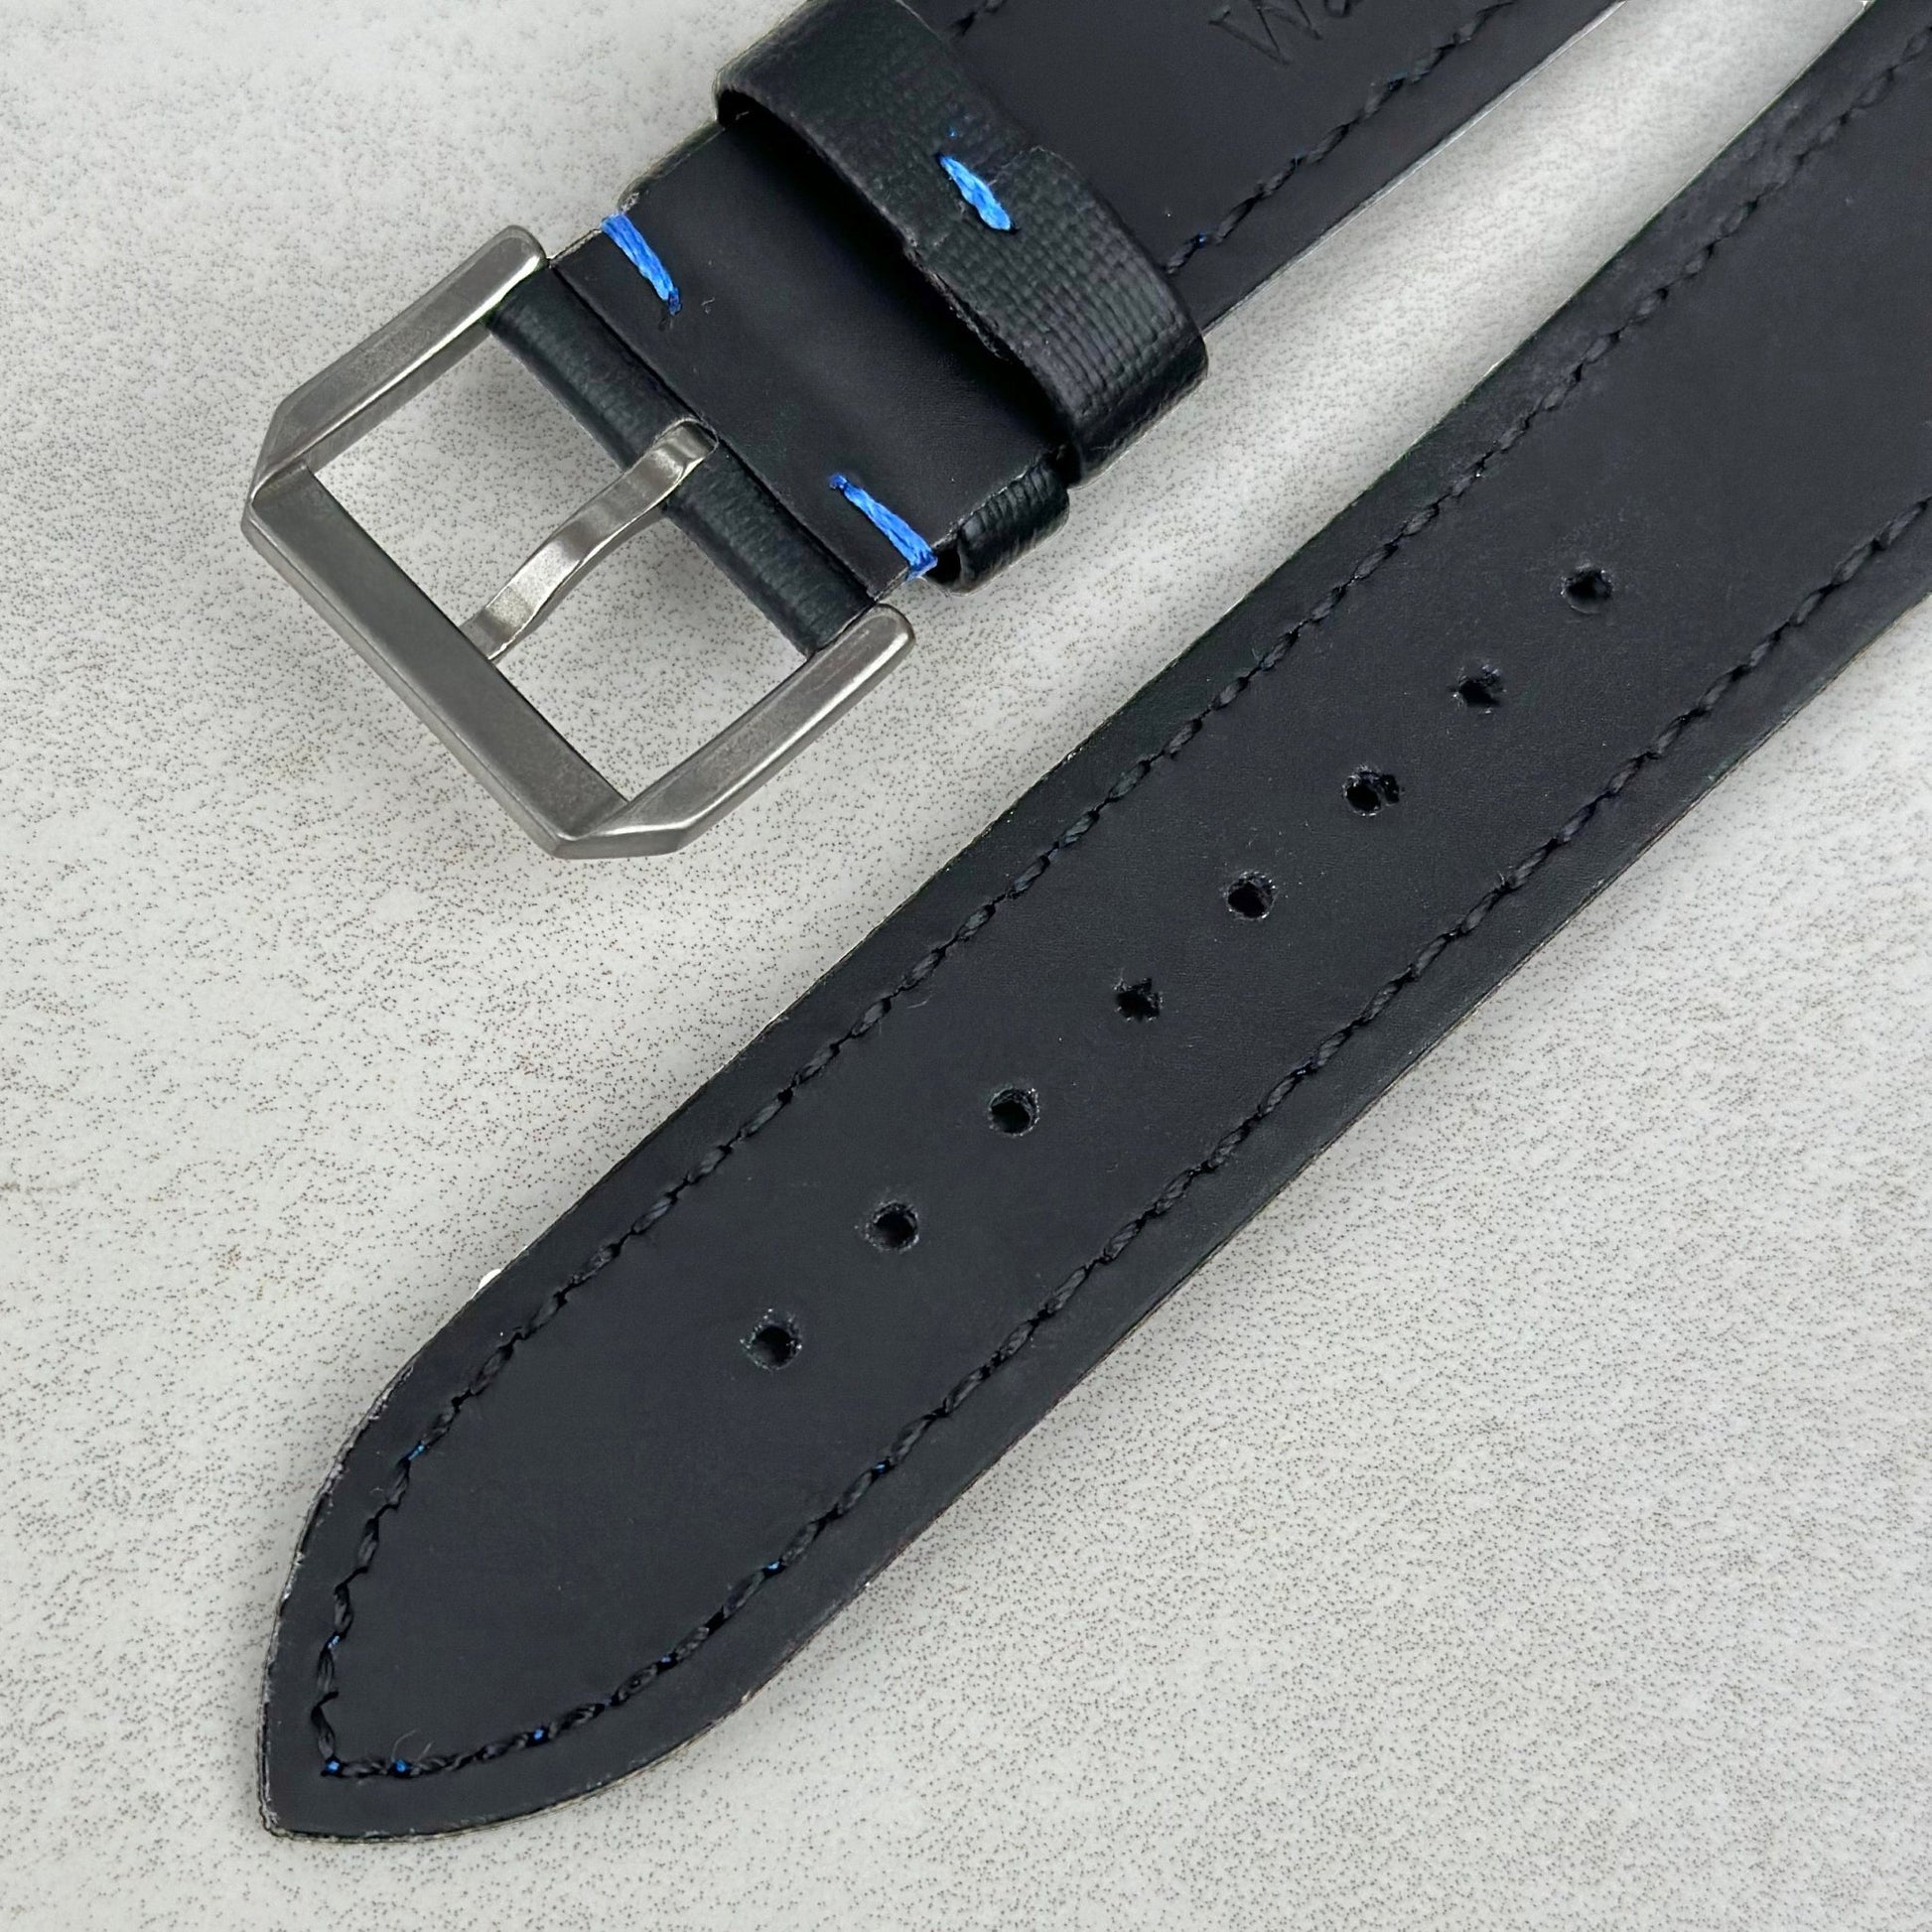 Underside of the brushed 316L stainless steel buckle on the Bermuda jet black sail cloth watch strap. Watch And Strap